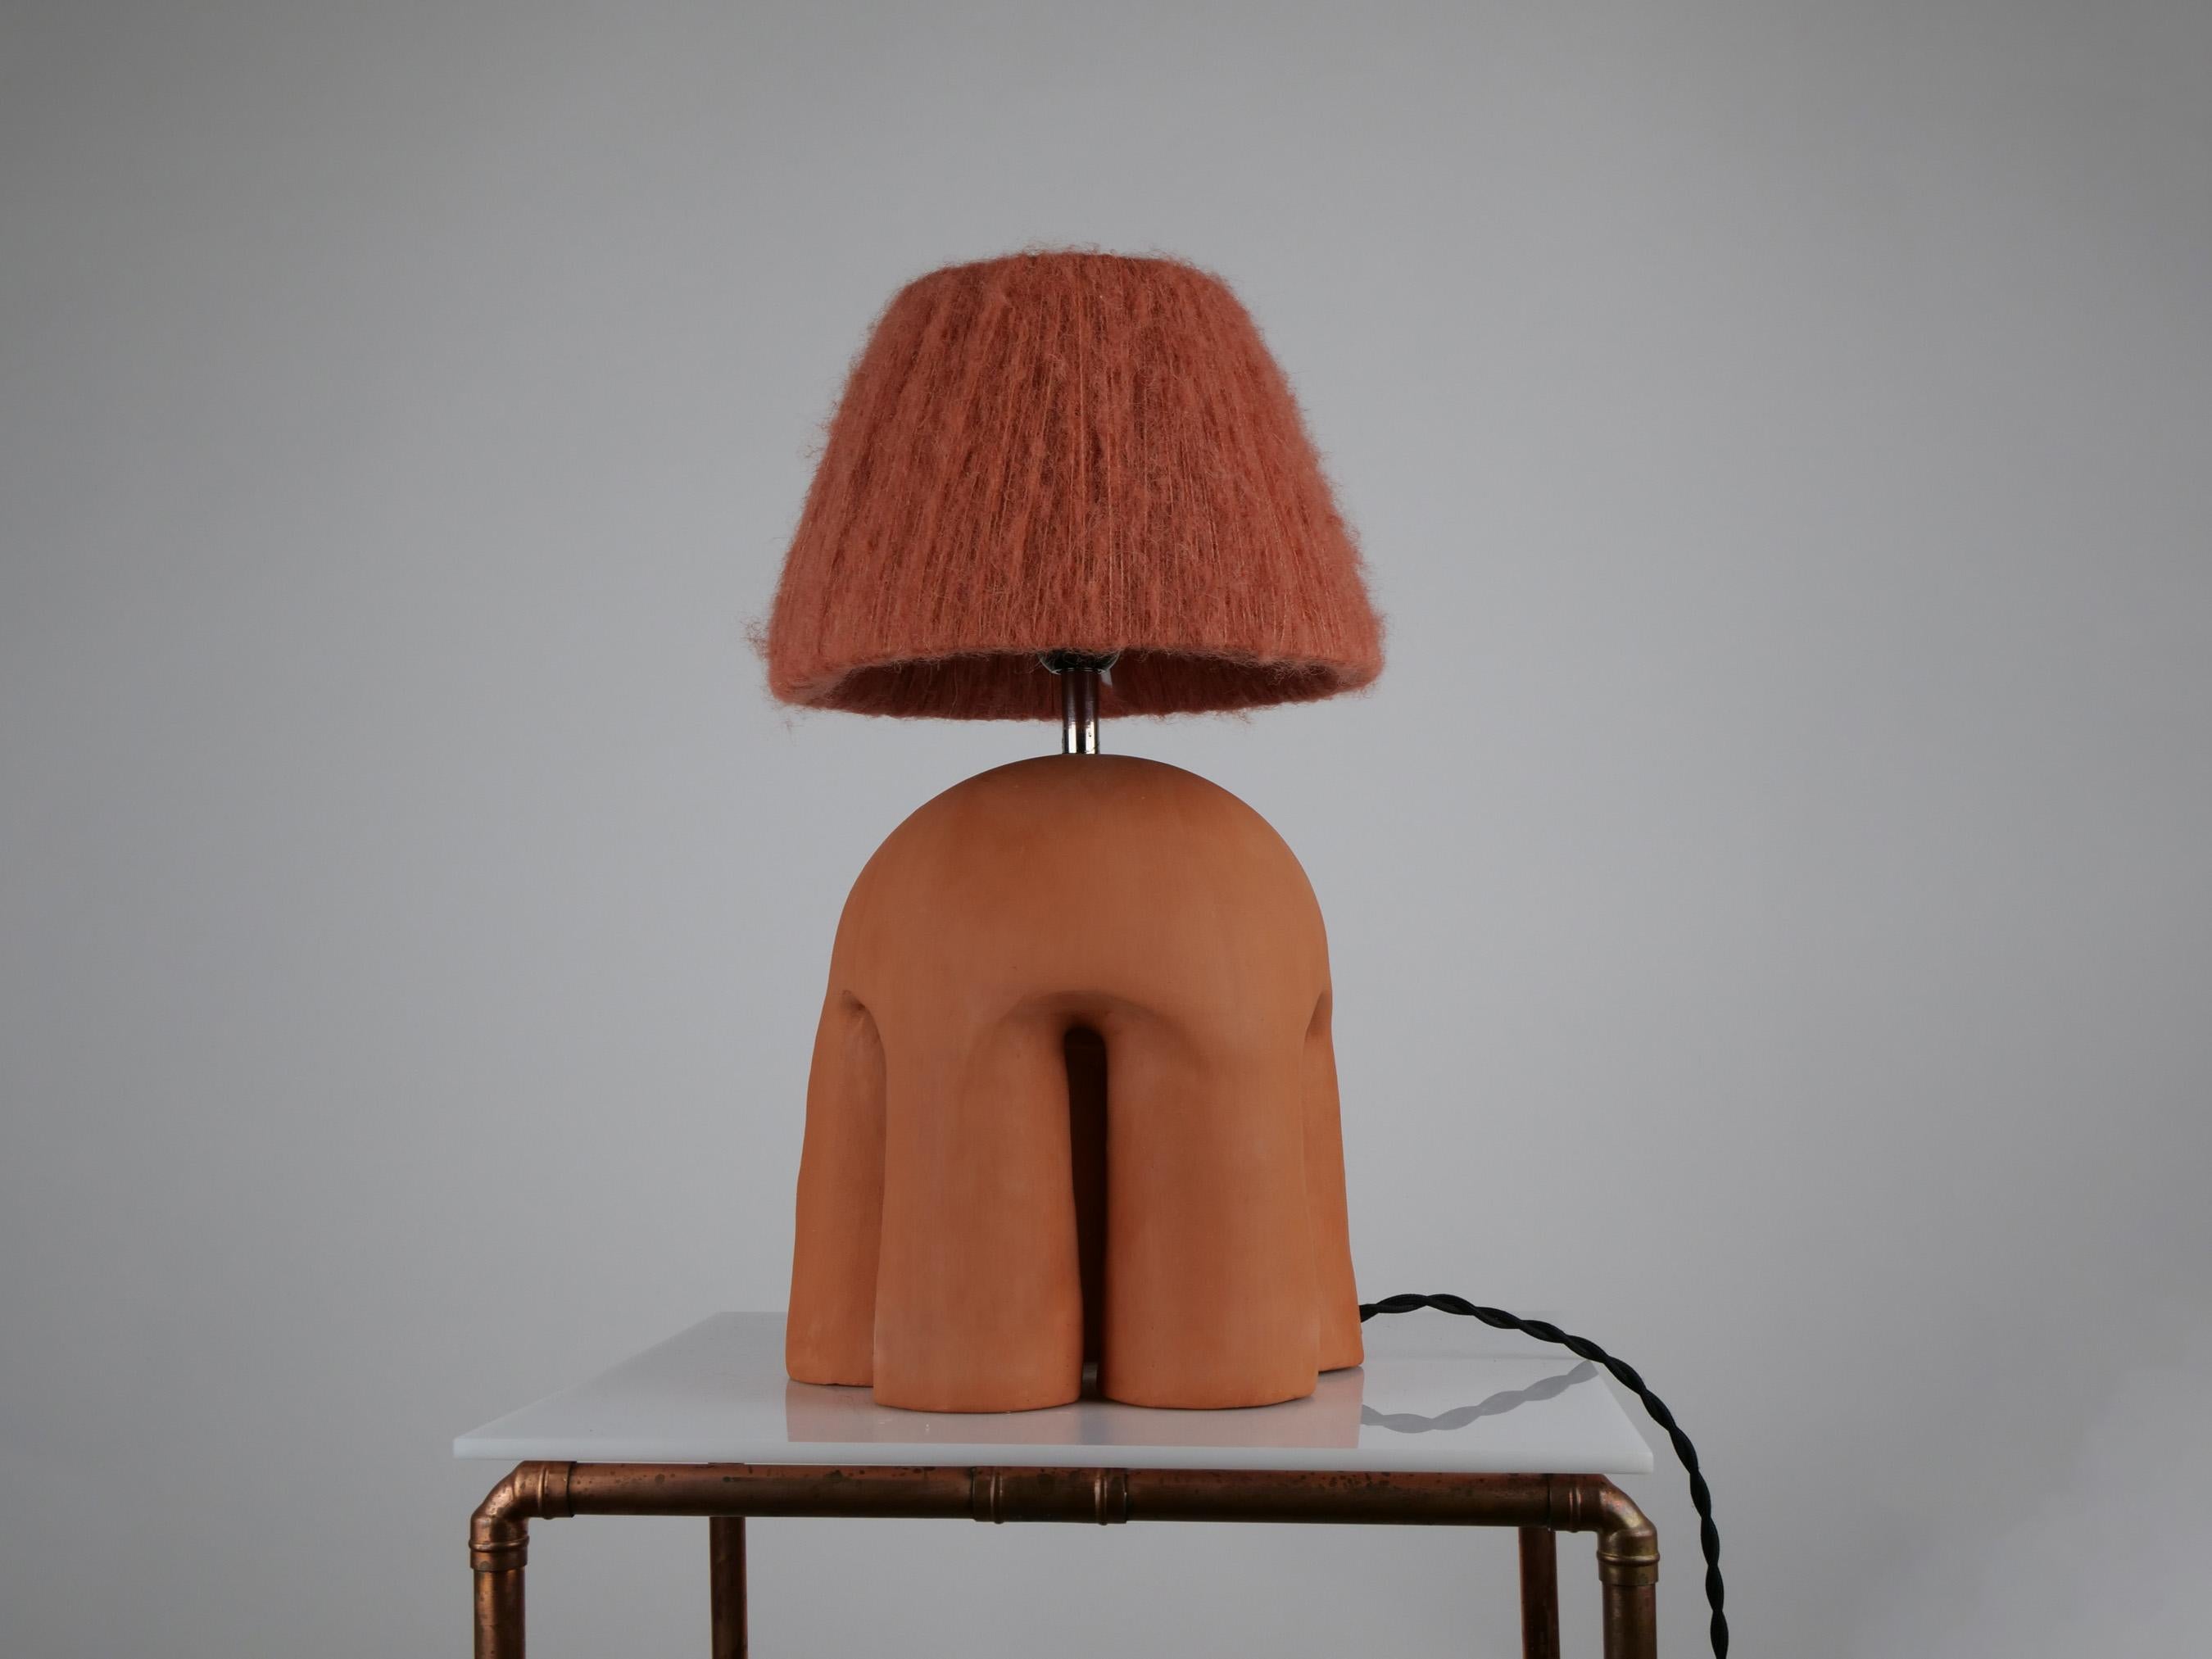 The Malvern lamp is a hand-built ceramic lamp inspired by the Malvern Hills in the UK. The texture of the alpaca silk lampshade contrasts to the hard surface of the terracotta yet they create a perfect balance. Each lamp is unique and has its own